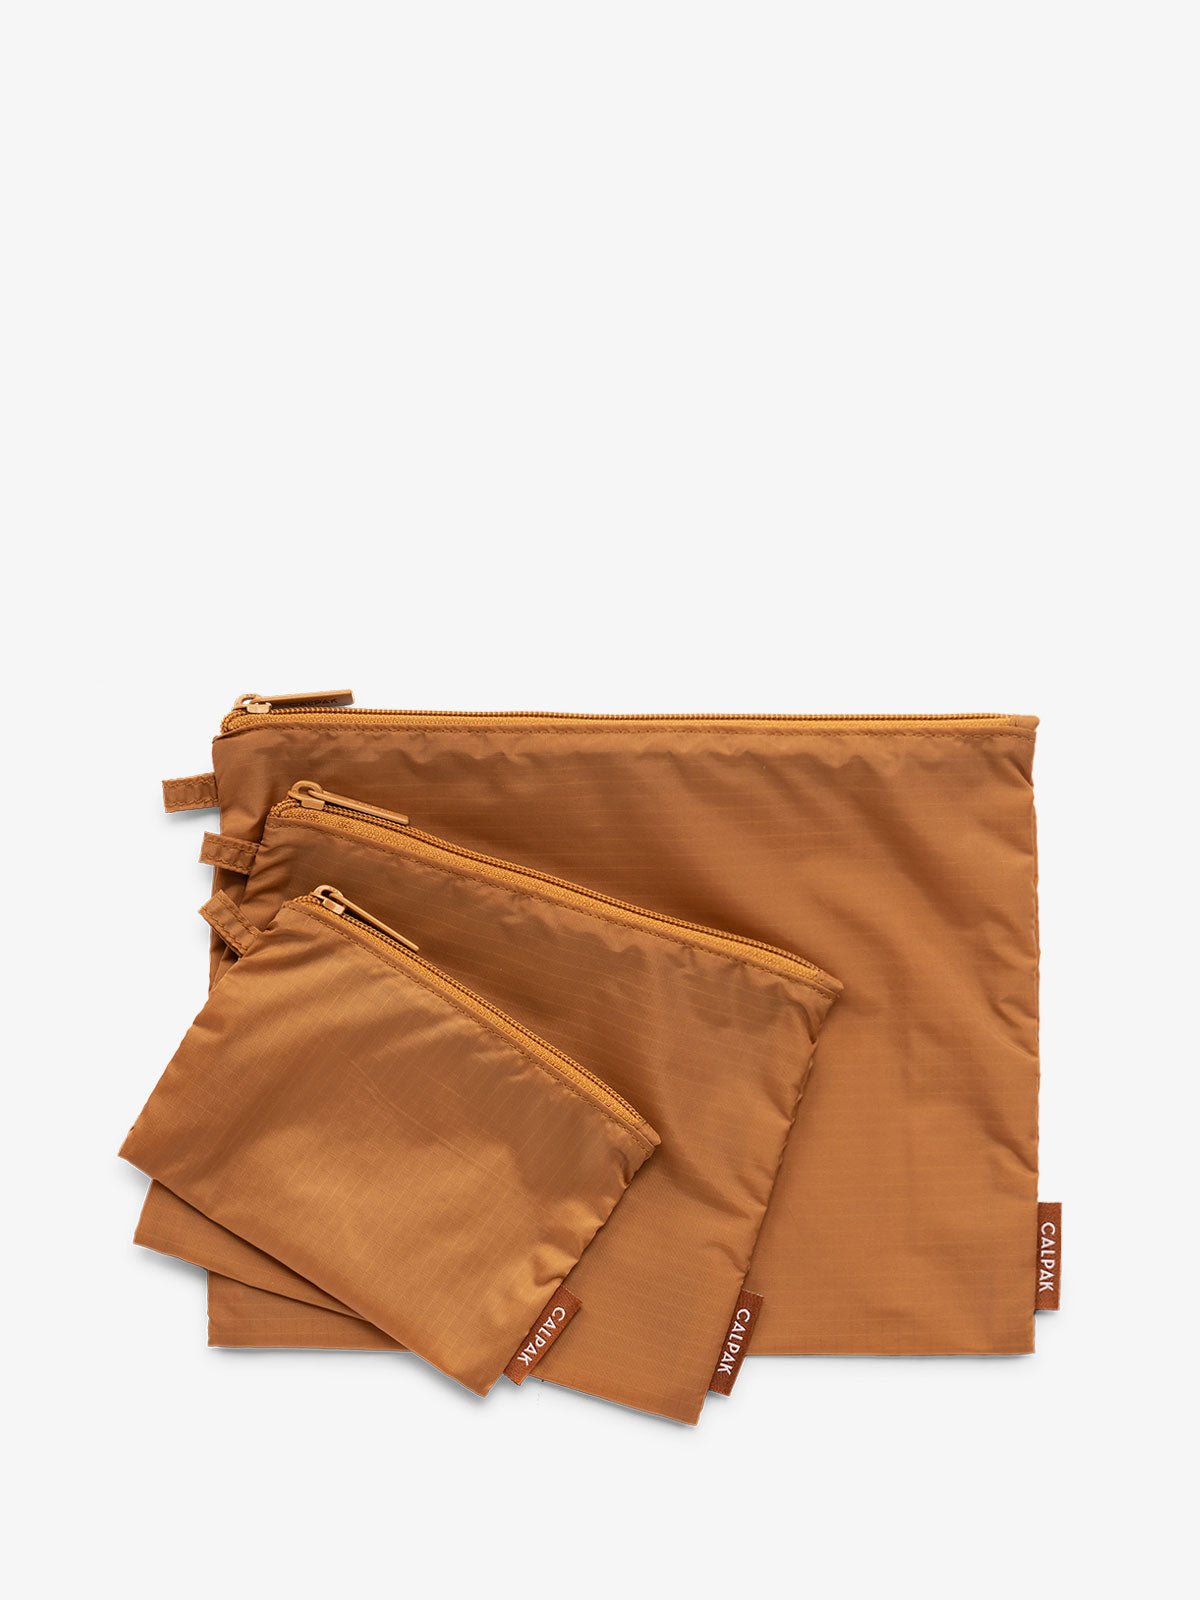 CALPAK Compakt zippered pouches in brown camel